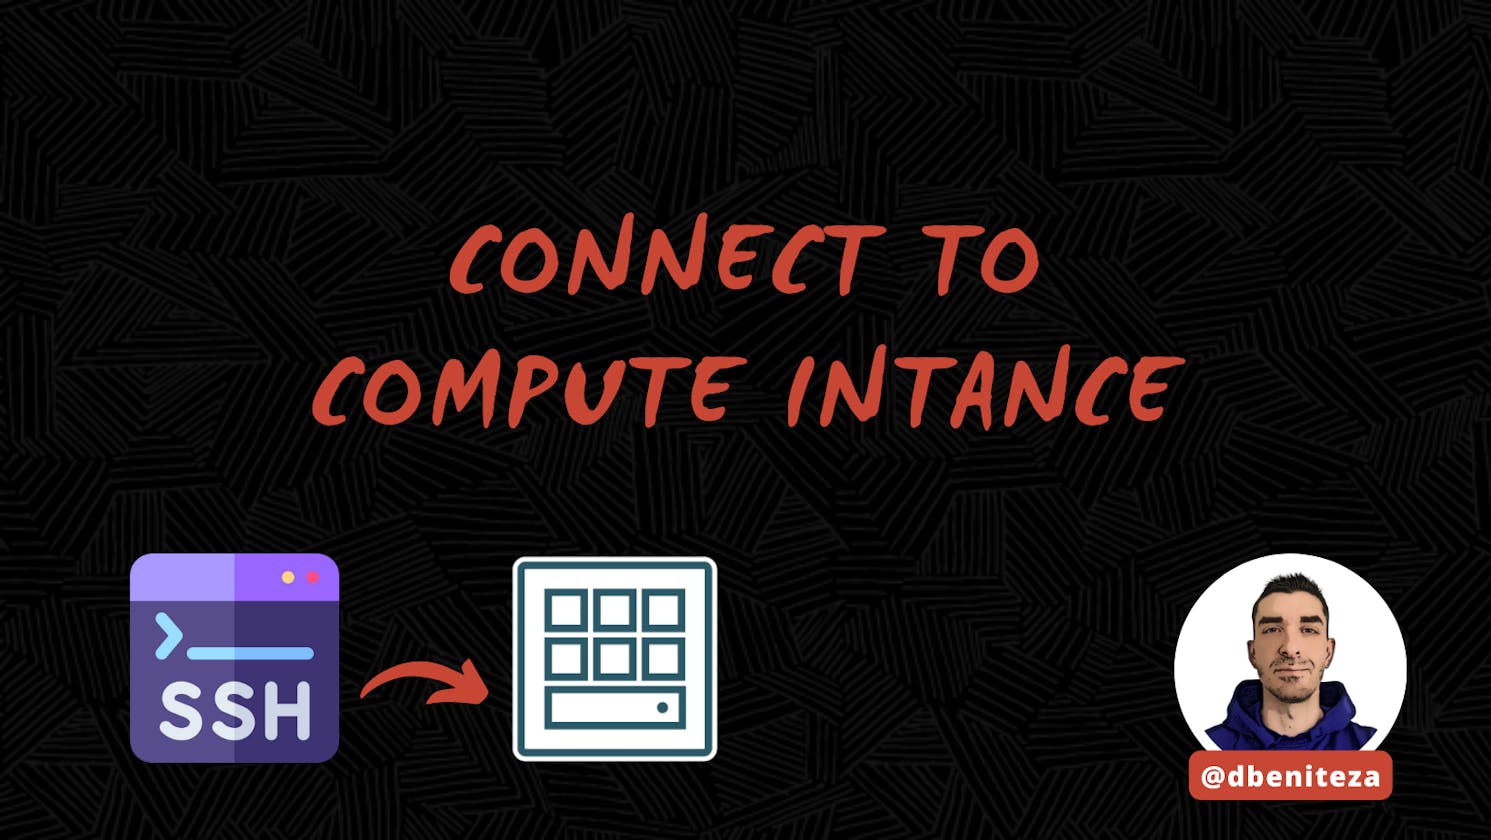 OCI - Connect to compute instance